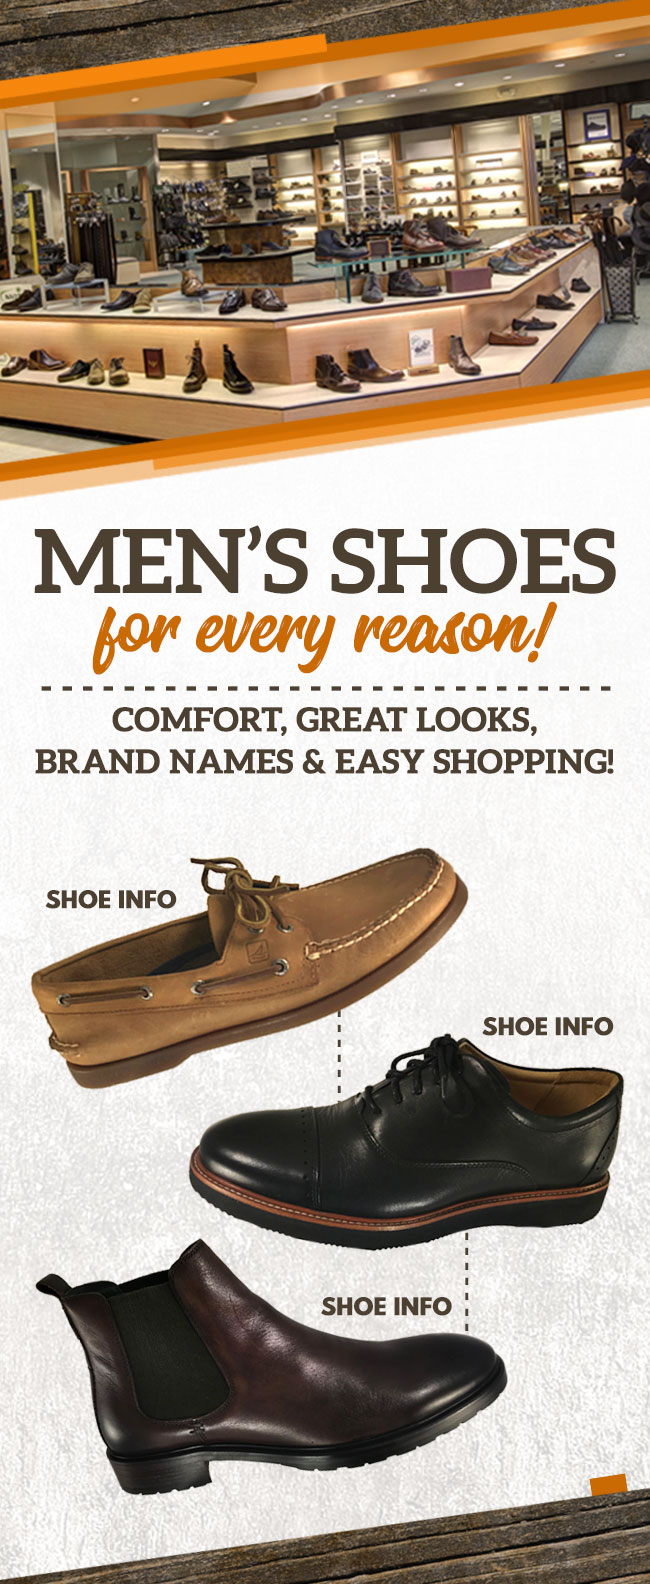 Mens-Shoes_Graphic.jpg